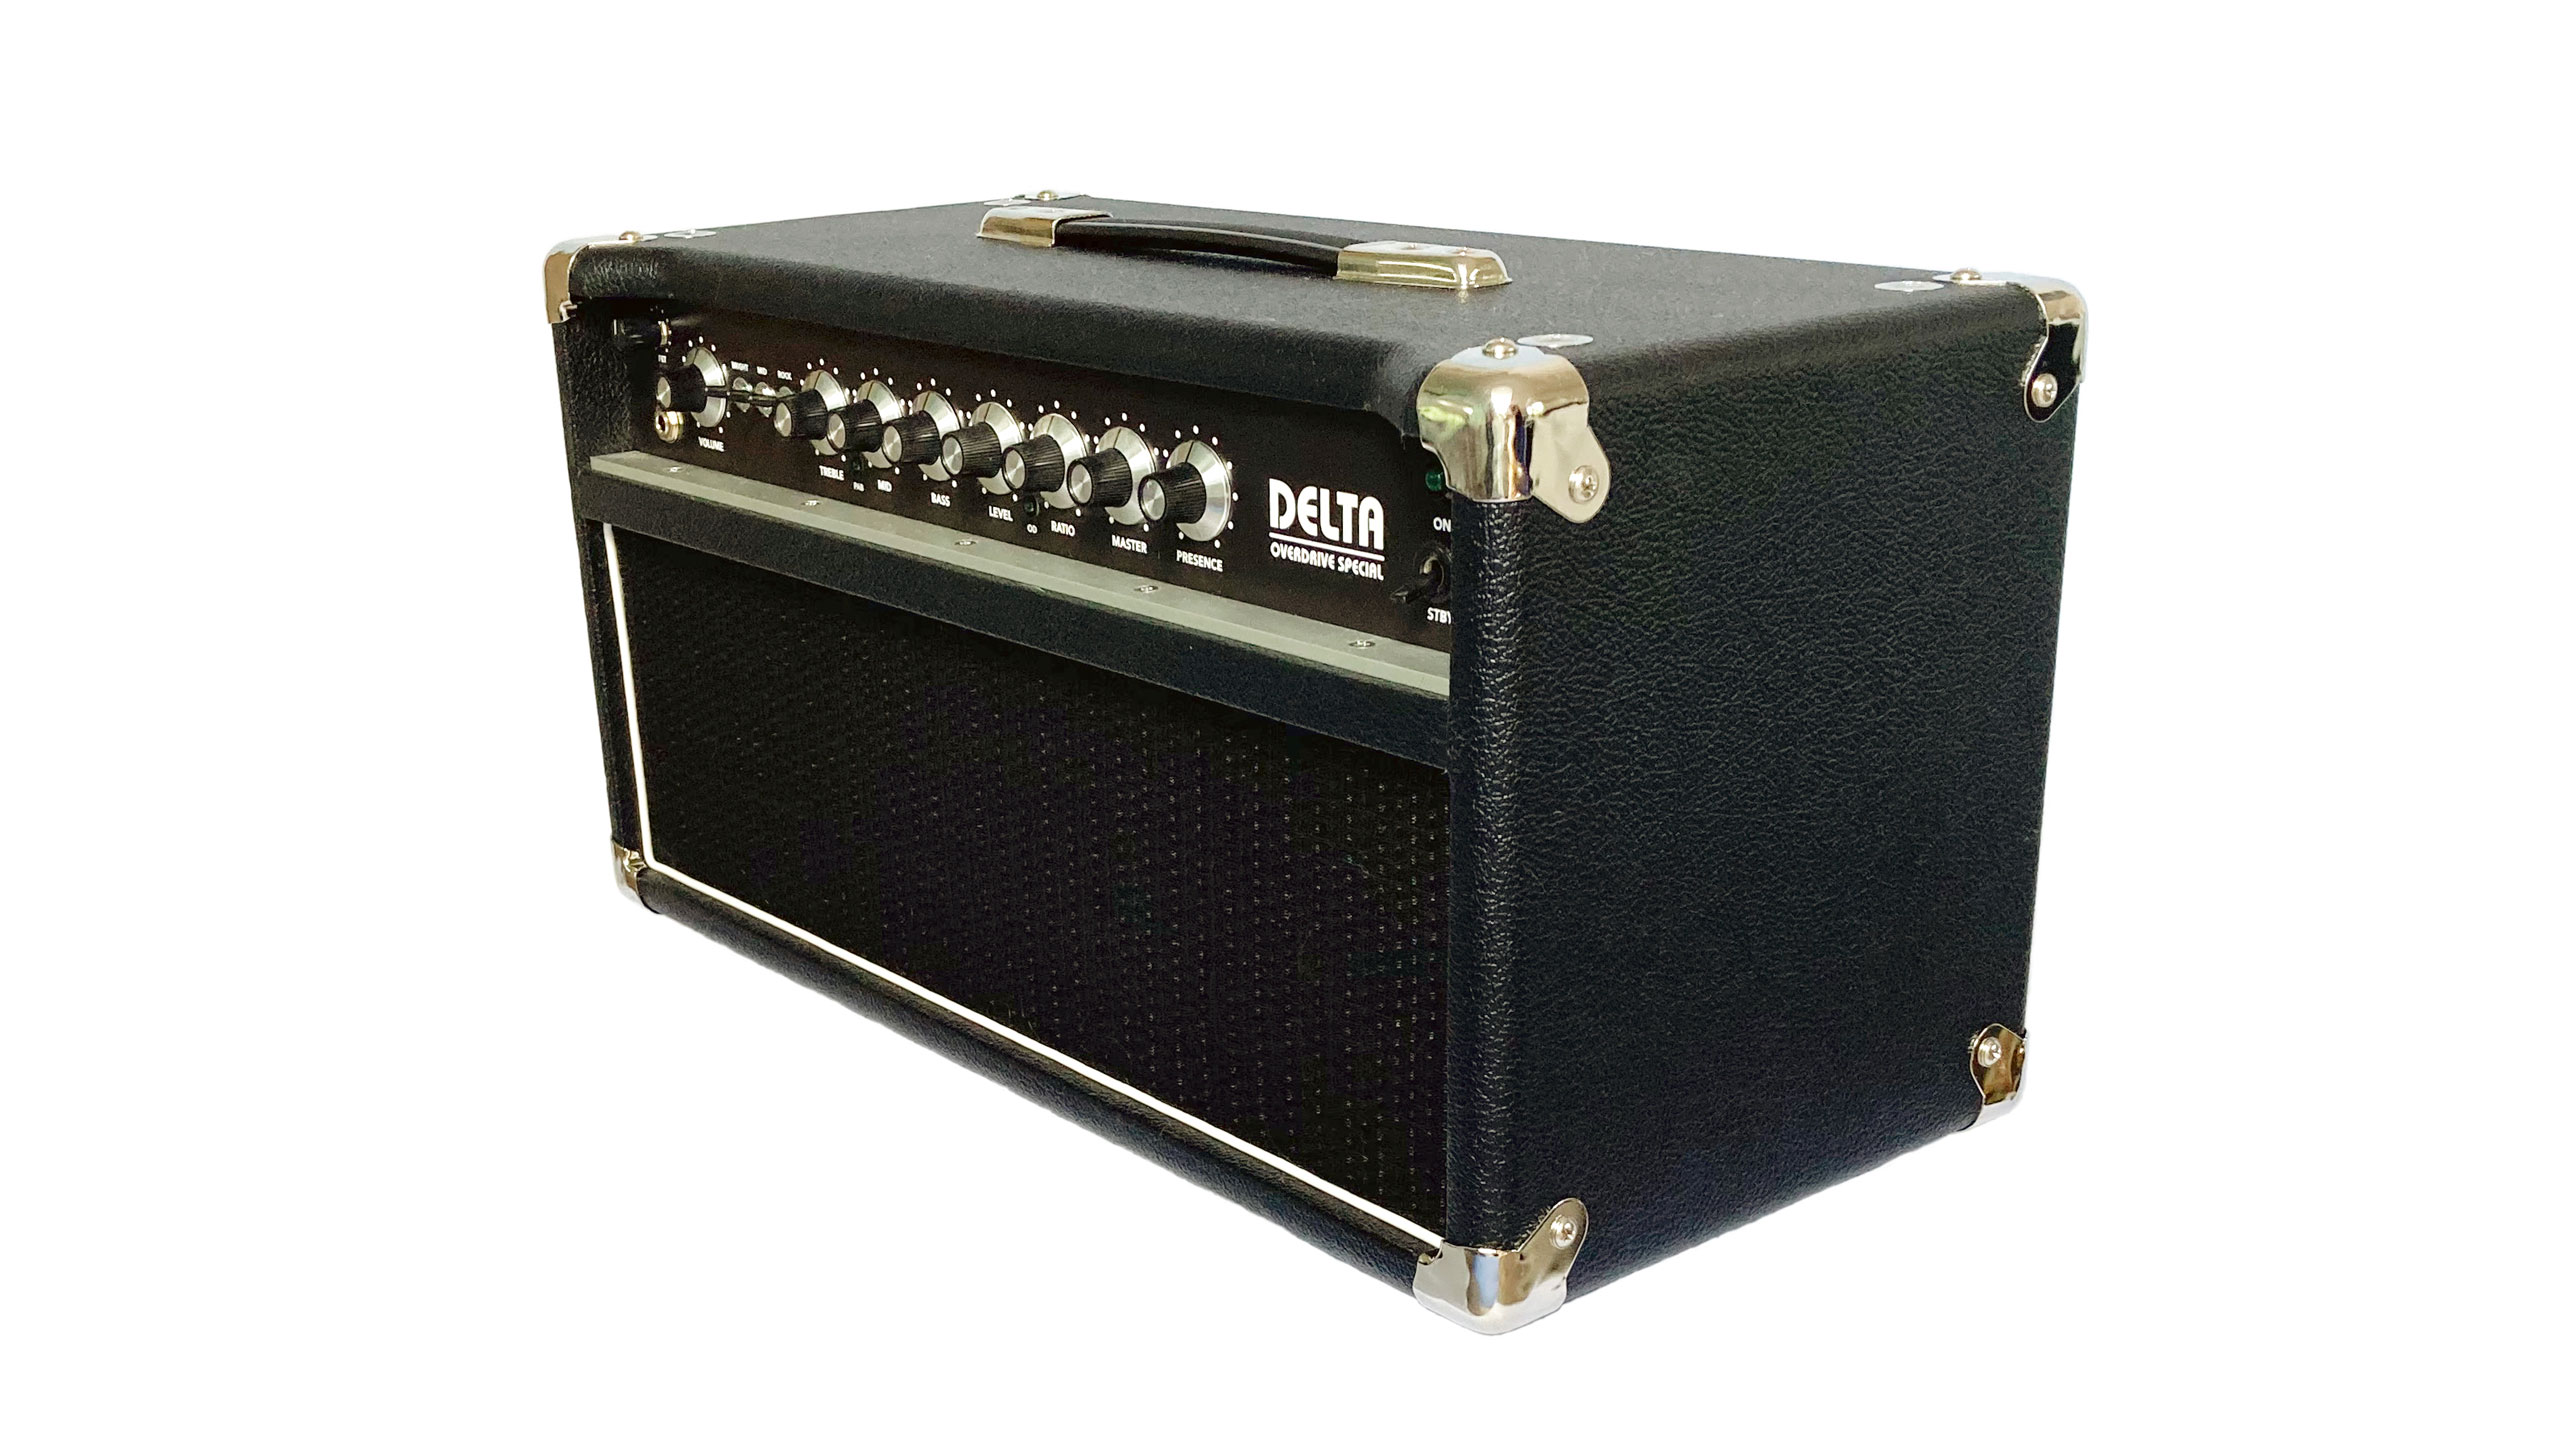 Delta guitar amp - right front low